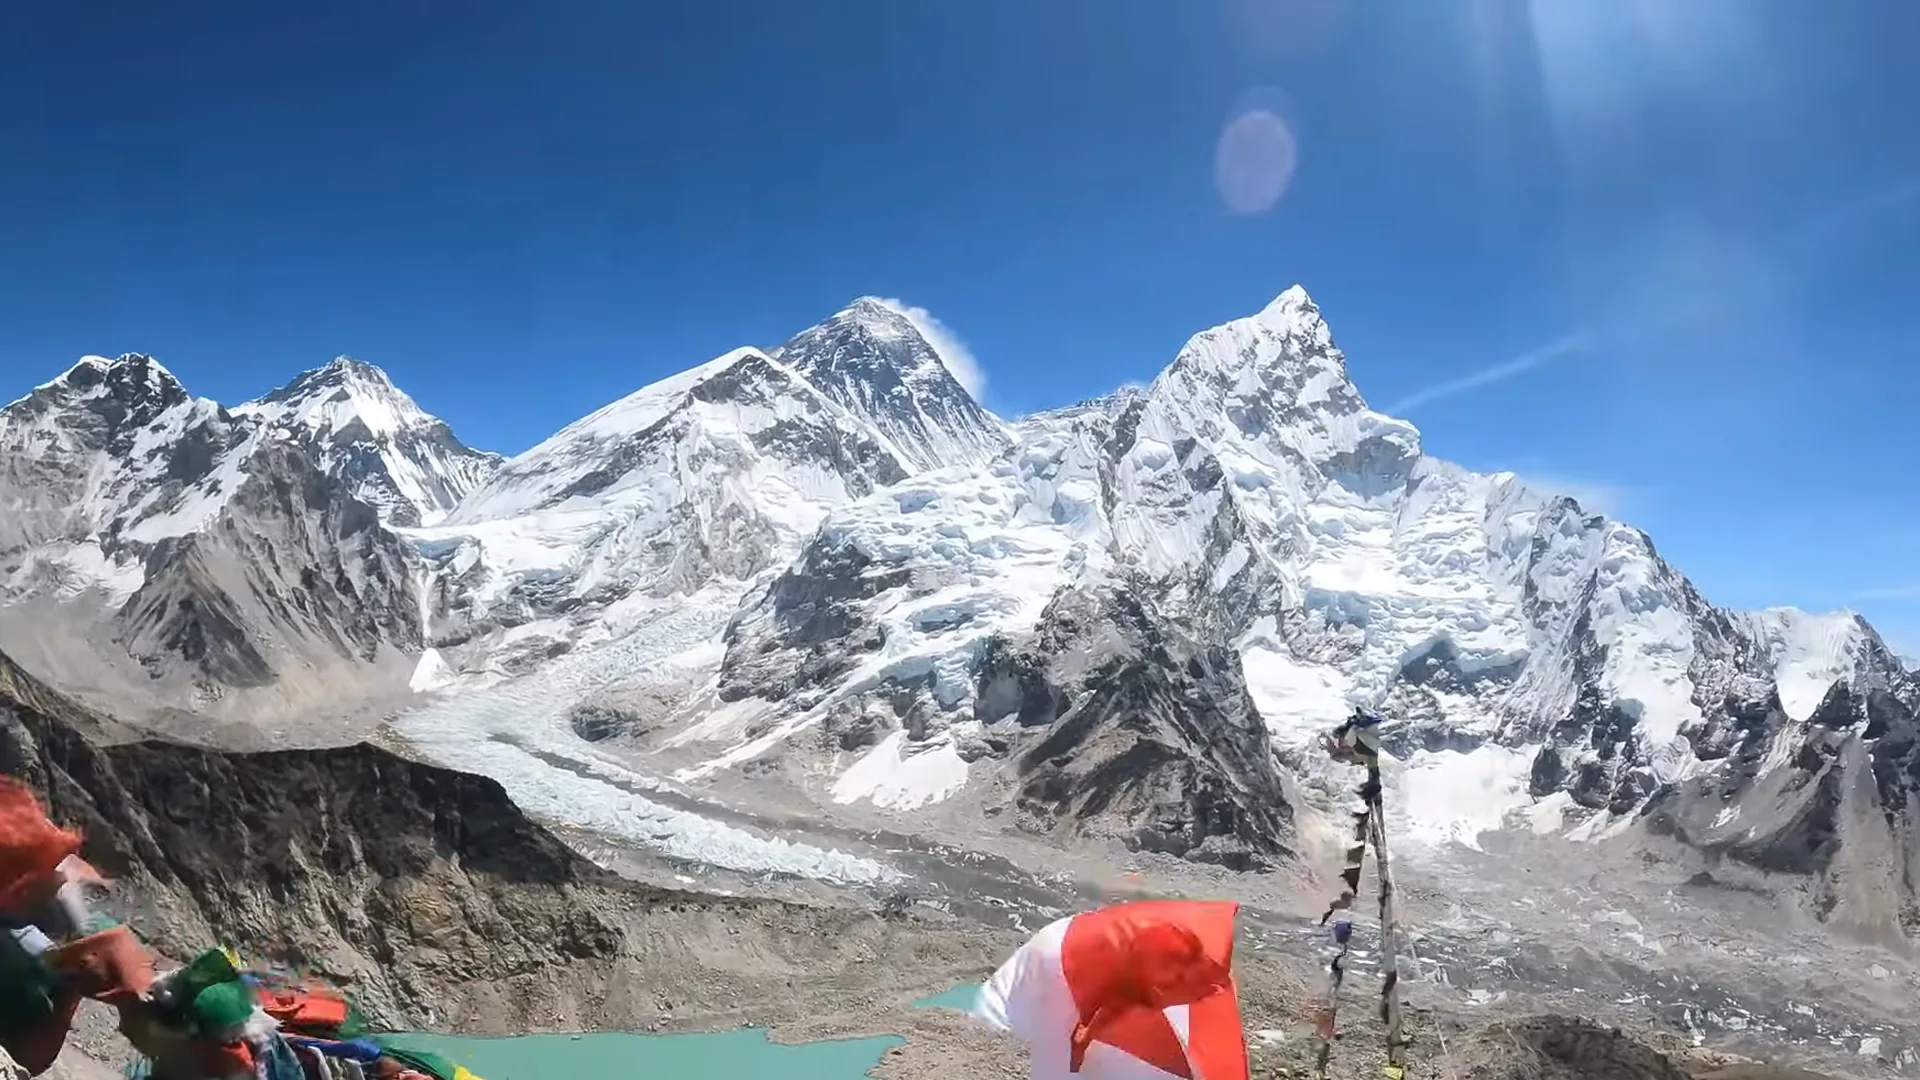 View of Everest from Kala Patthar